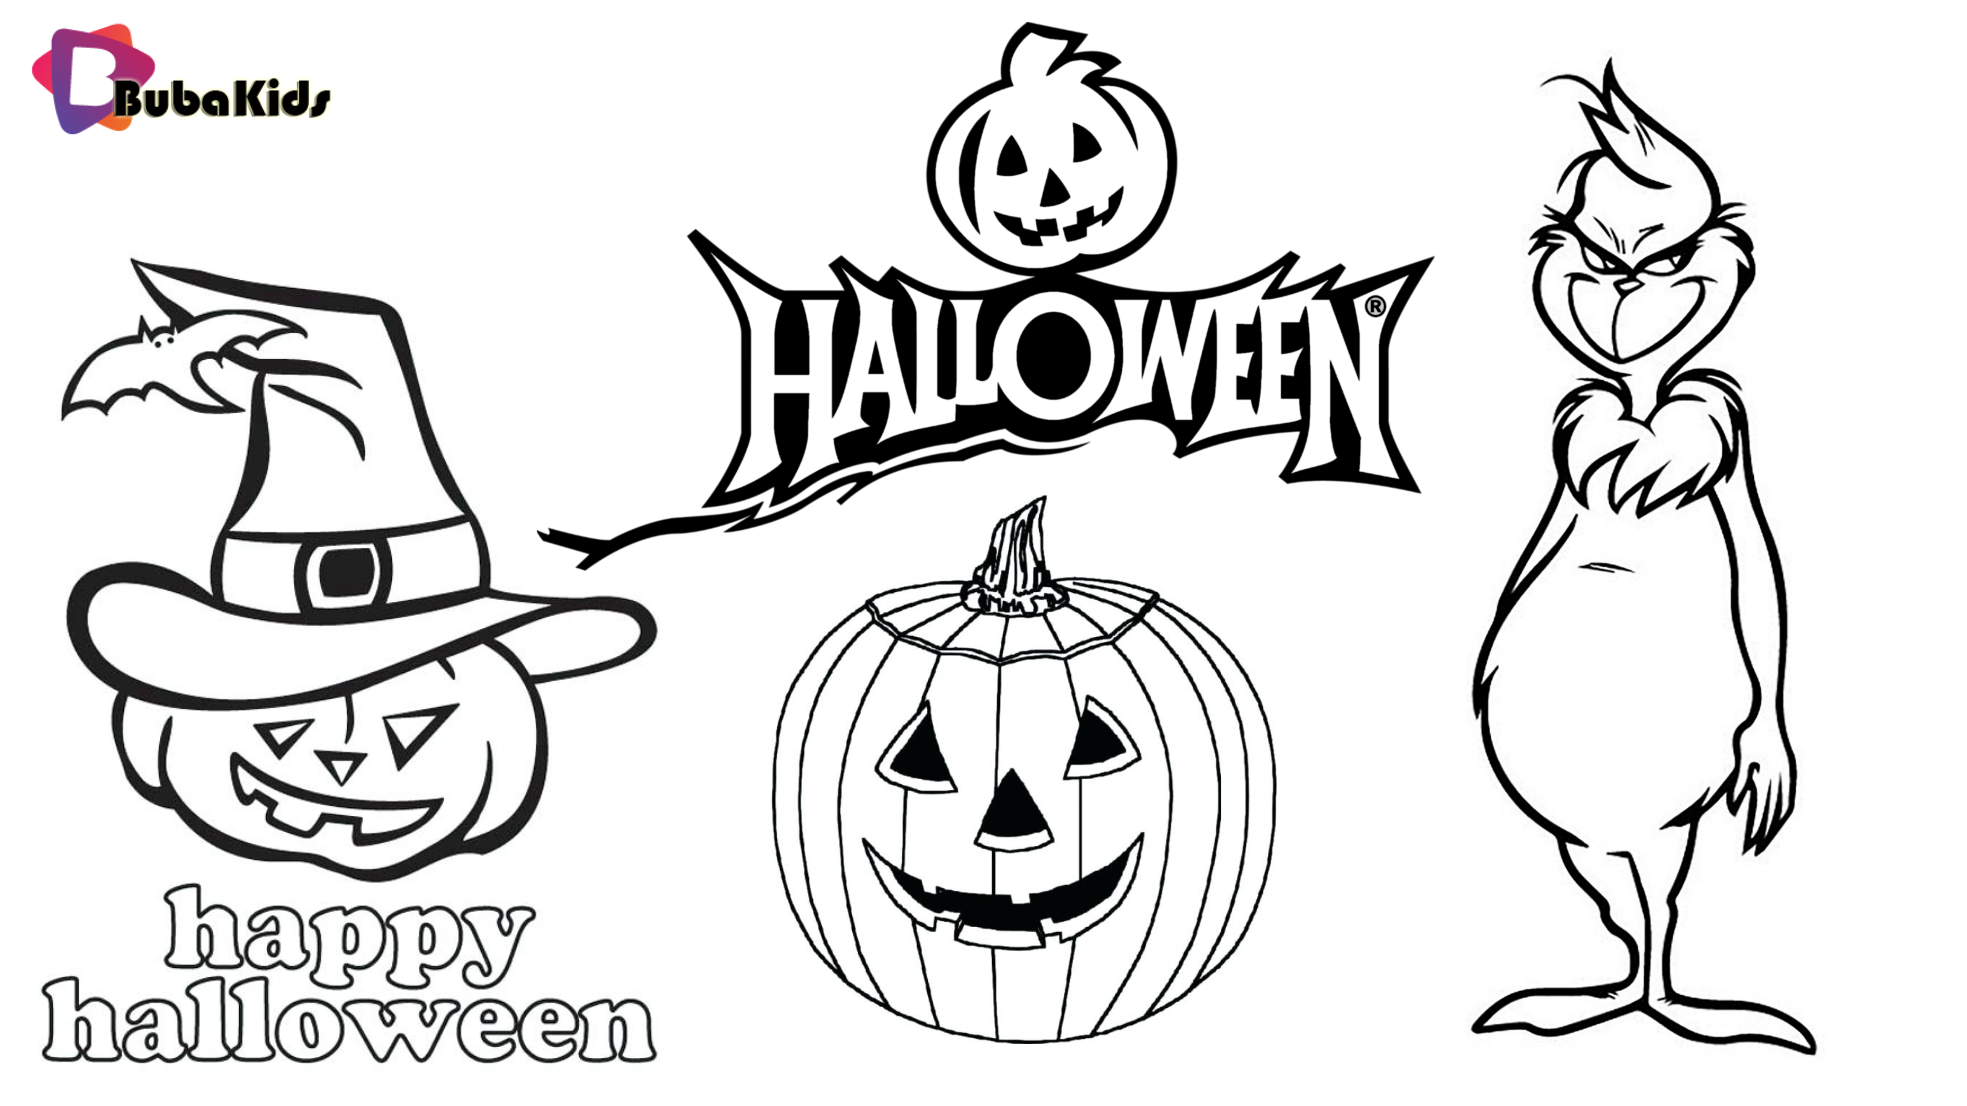 The grinch with jack ‘o lantern pumpkins halloween 2019 coloring page. Wallpaper